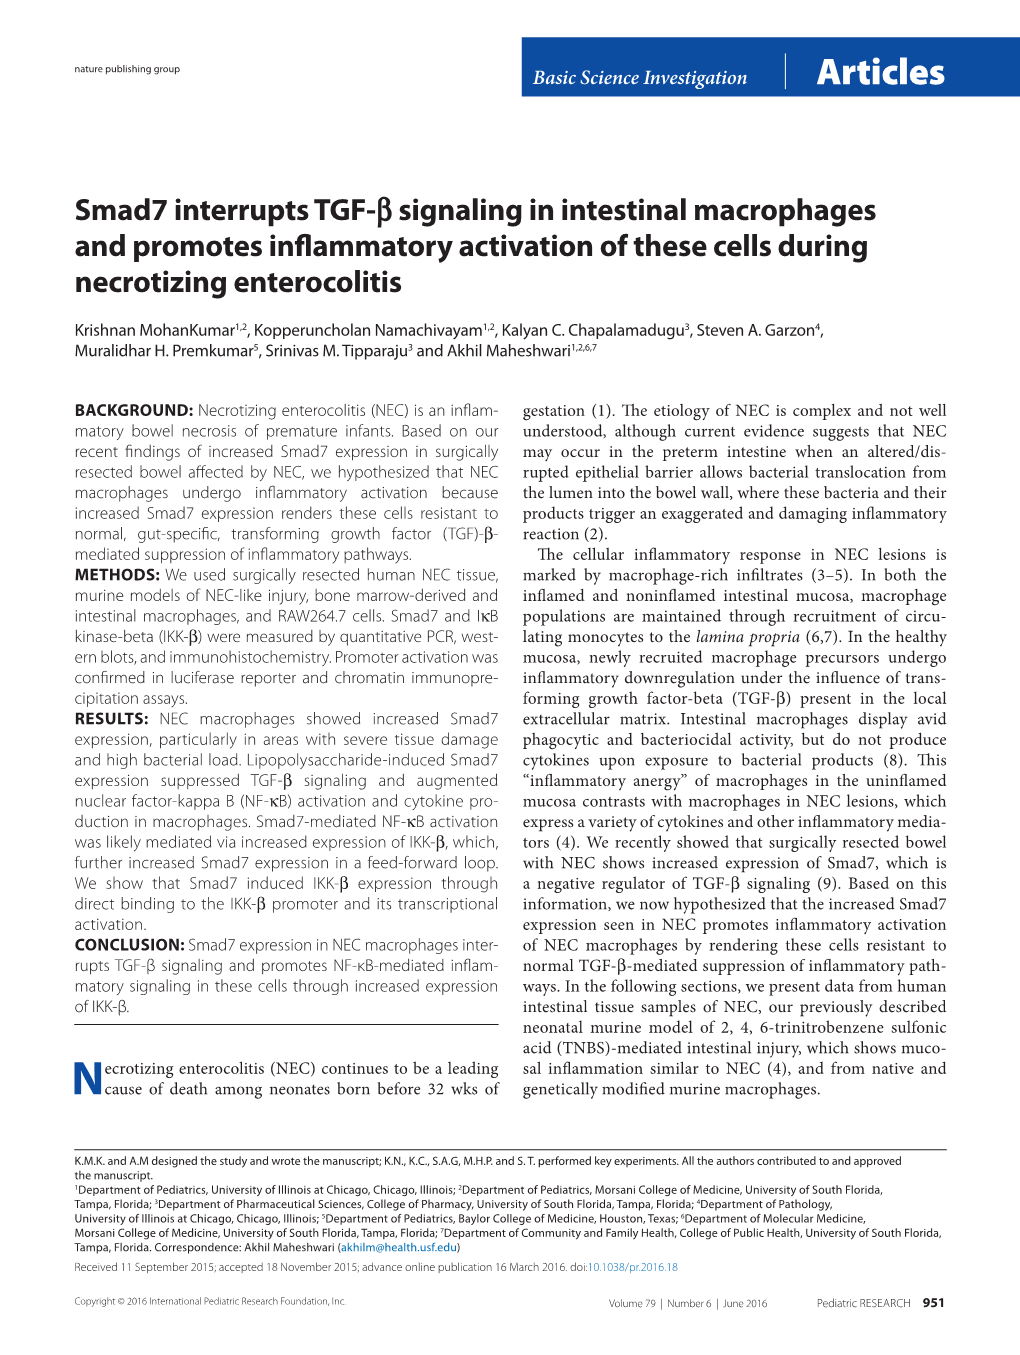 Smad7 Interrupts TG F-Β Signaling in Intestinal Macrophages and Promotes Inflammatory Activation of These Cells During Necroti